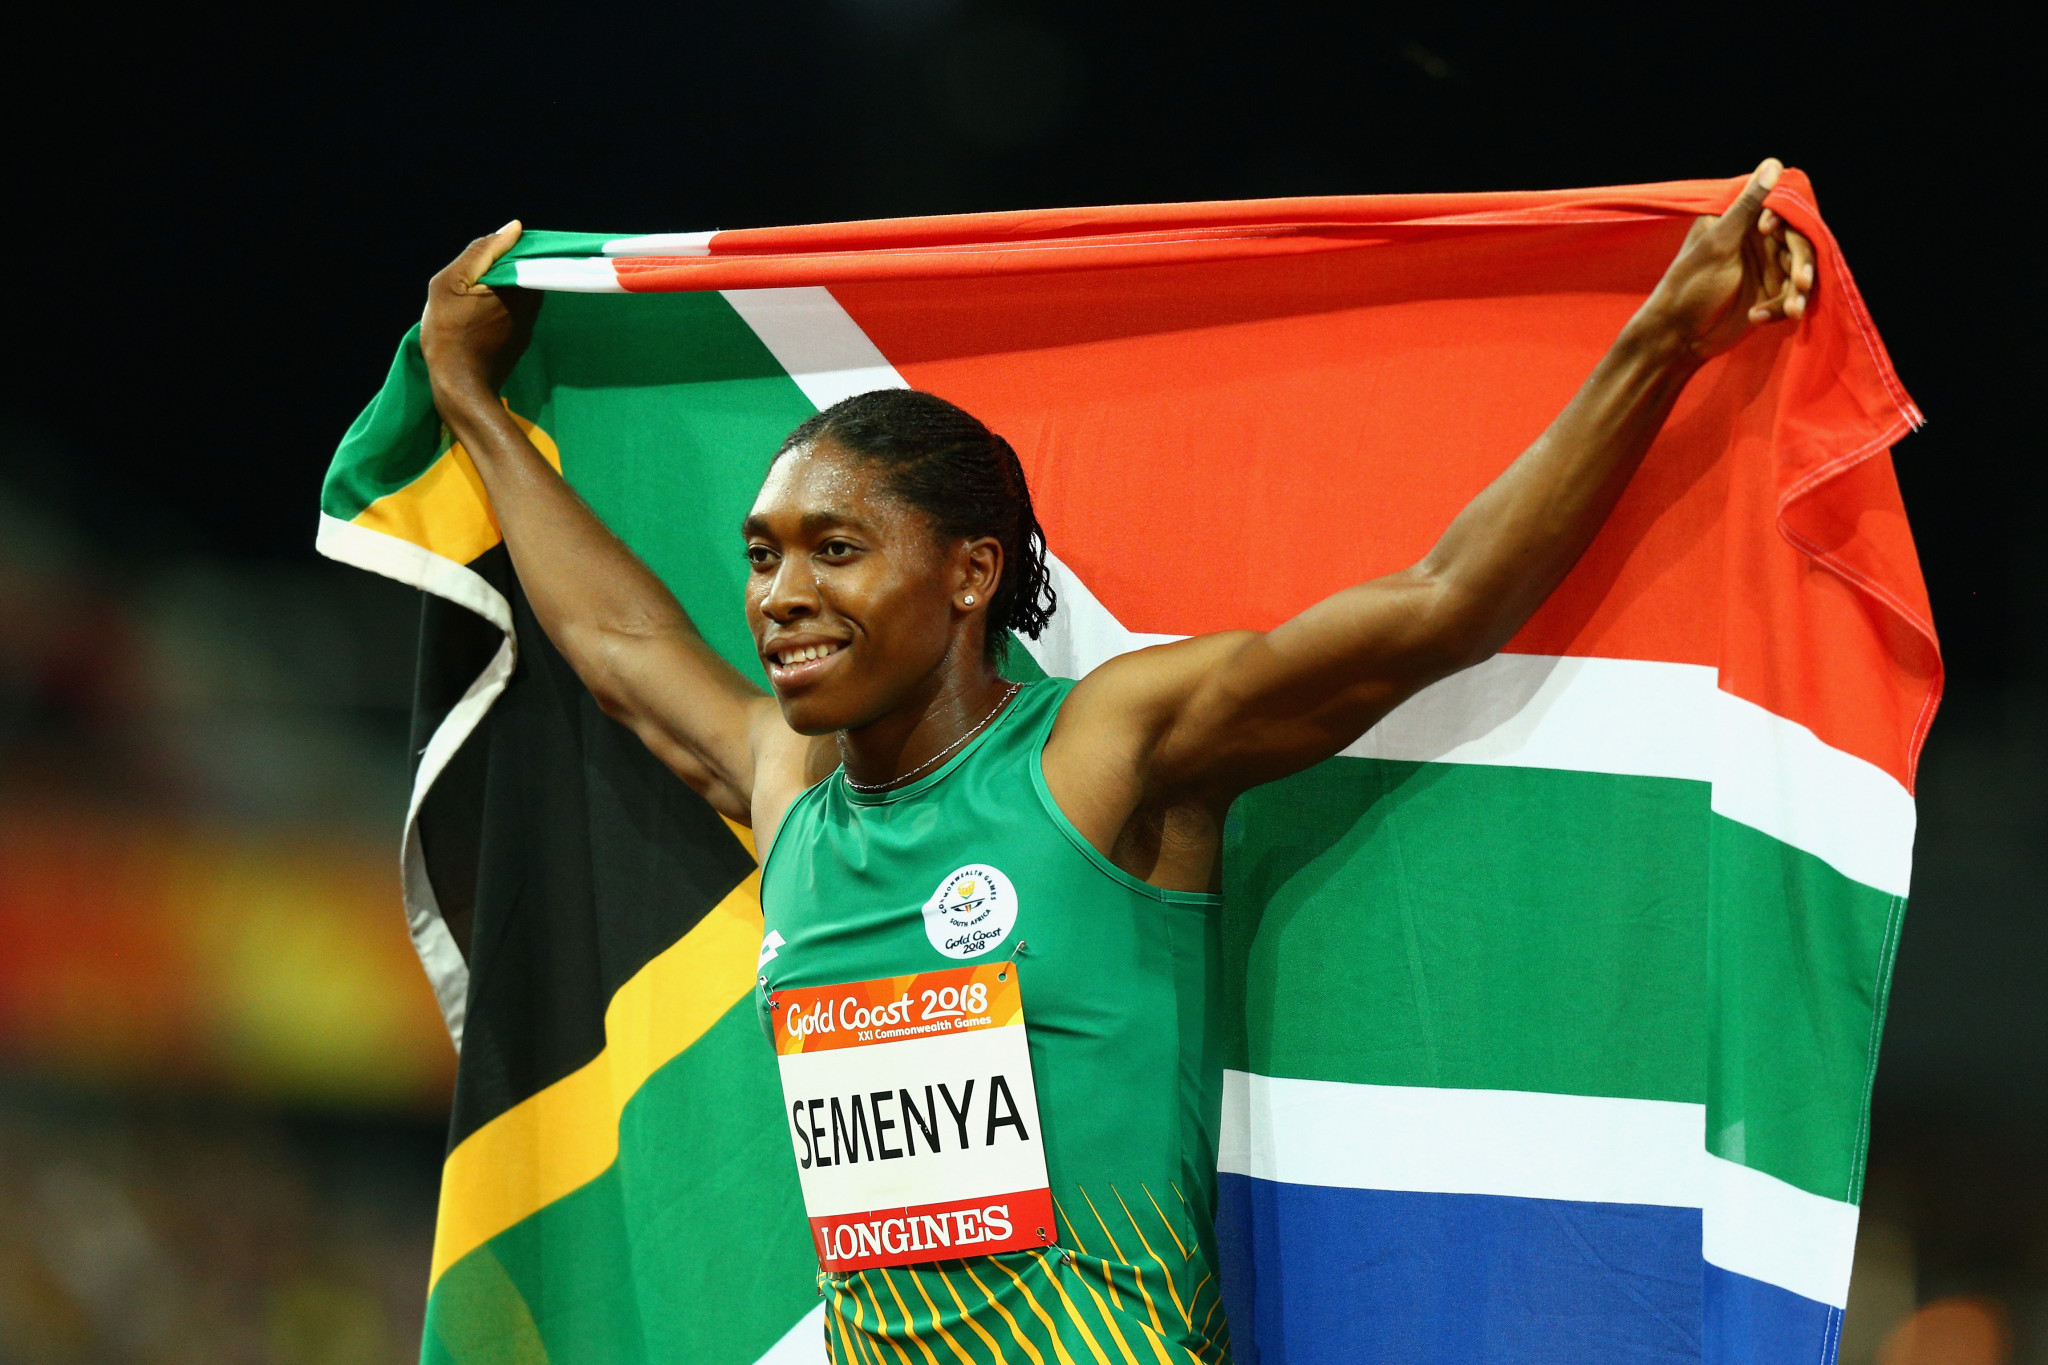 Semenya reign at the top threatened by new IAAF regulations